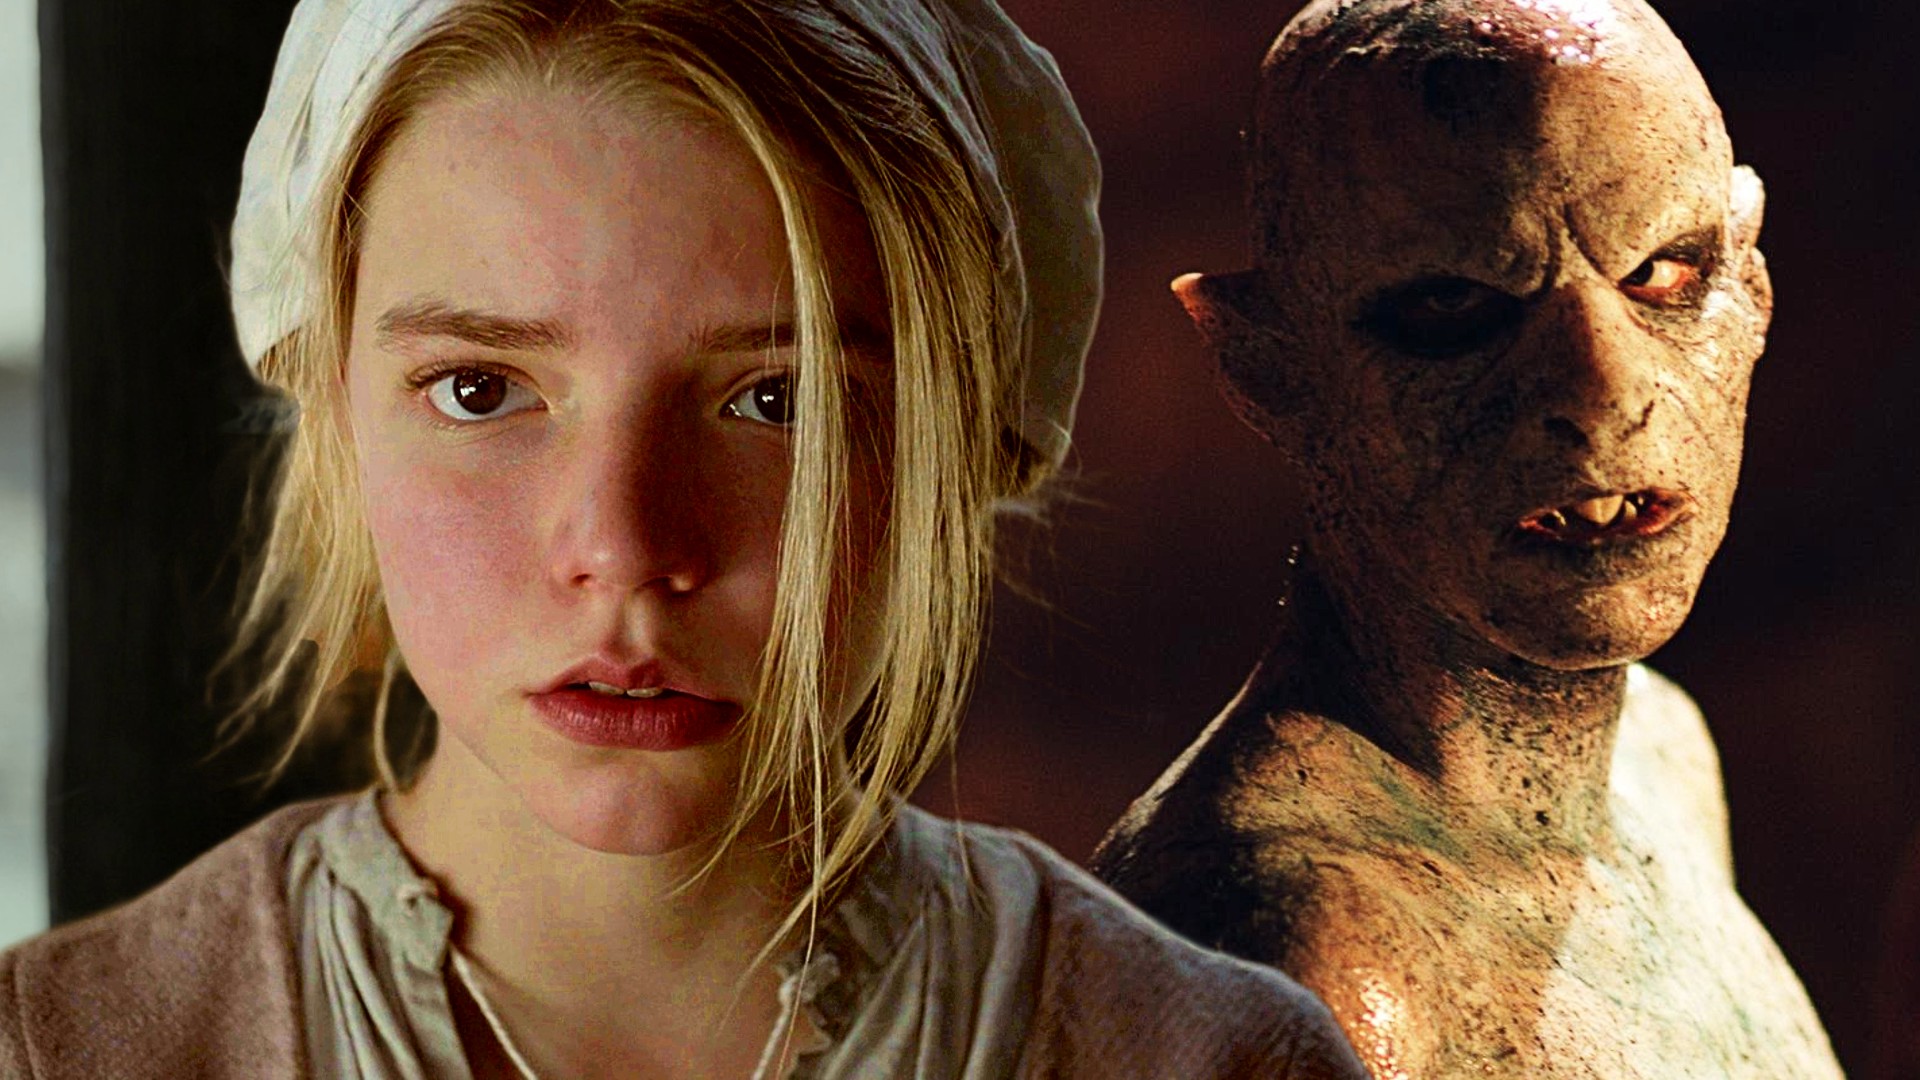 15 Horror Movies You Probably Missed but Definitely Shouldn't